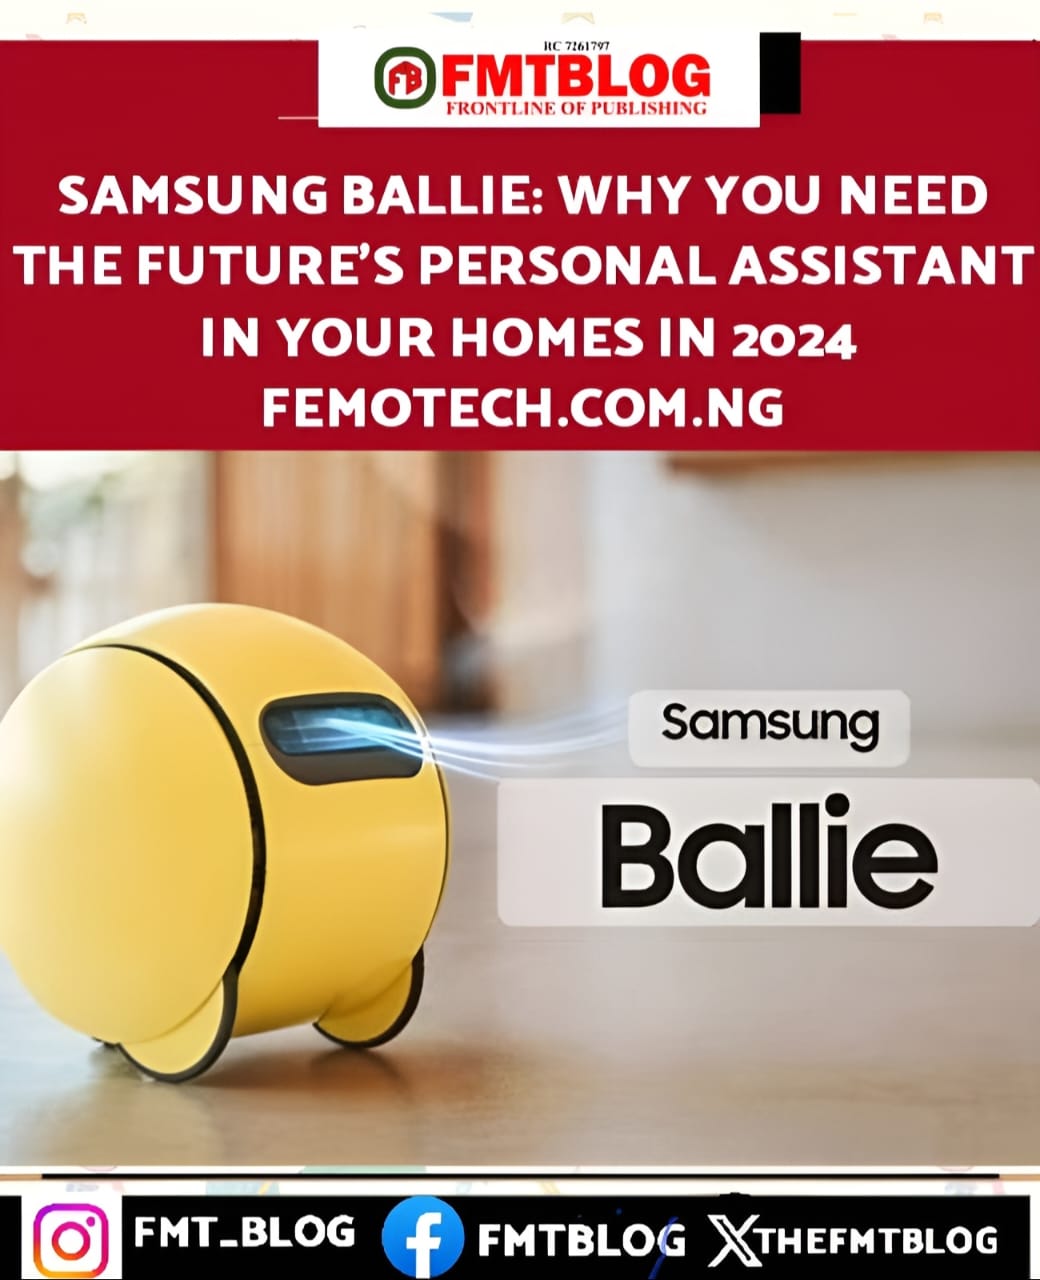 Samsung Ballie: Why You Need The Future’s Personal Assistant In Your Homes In 2024